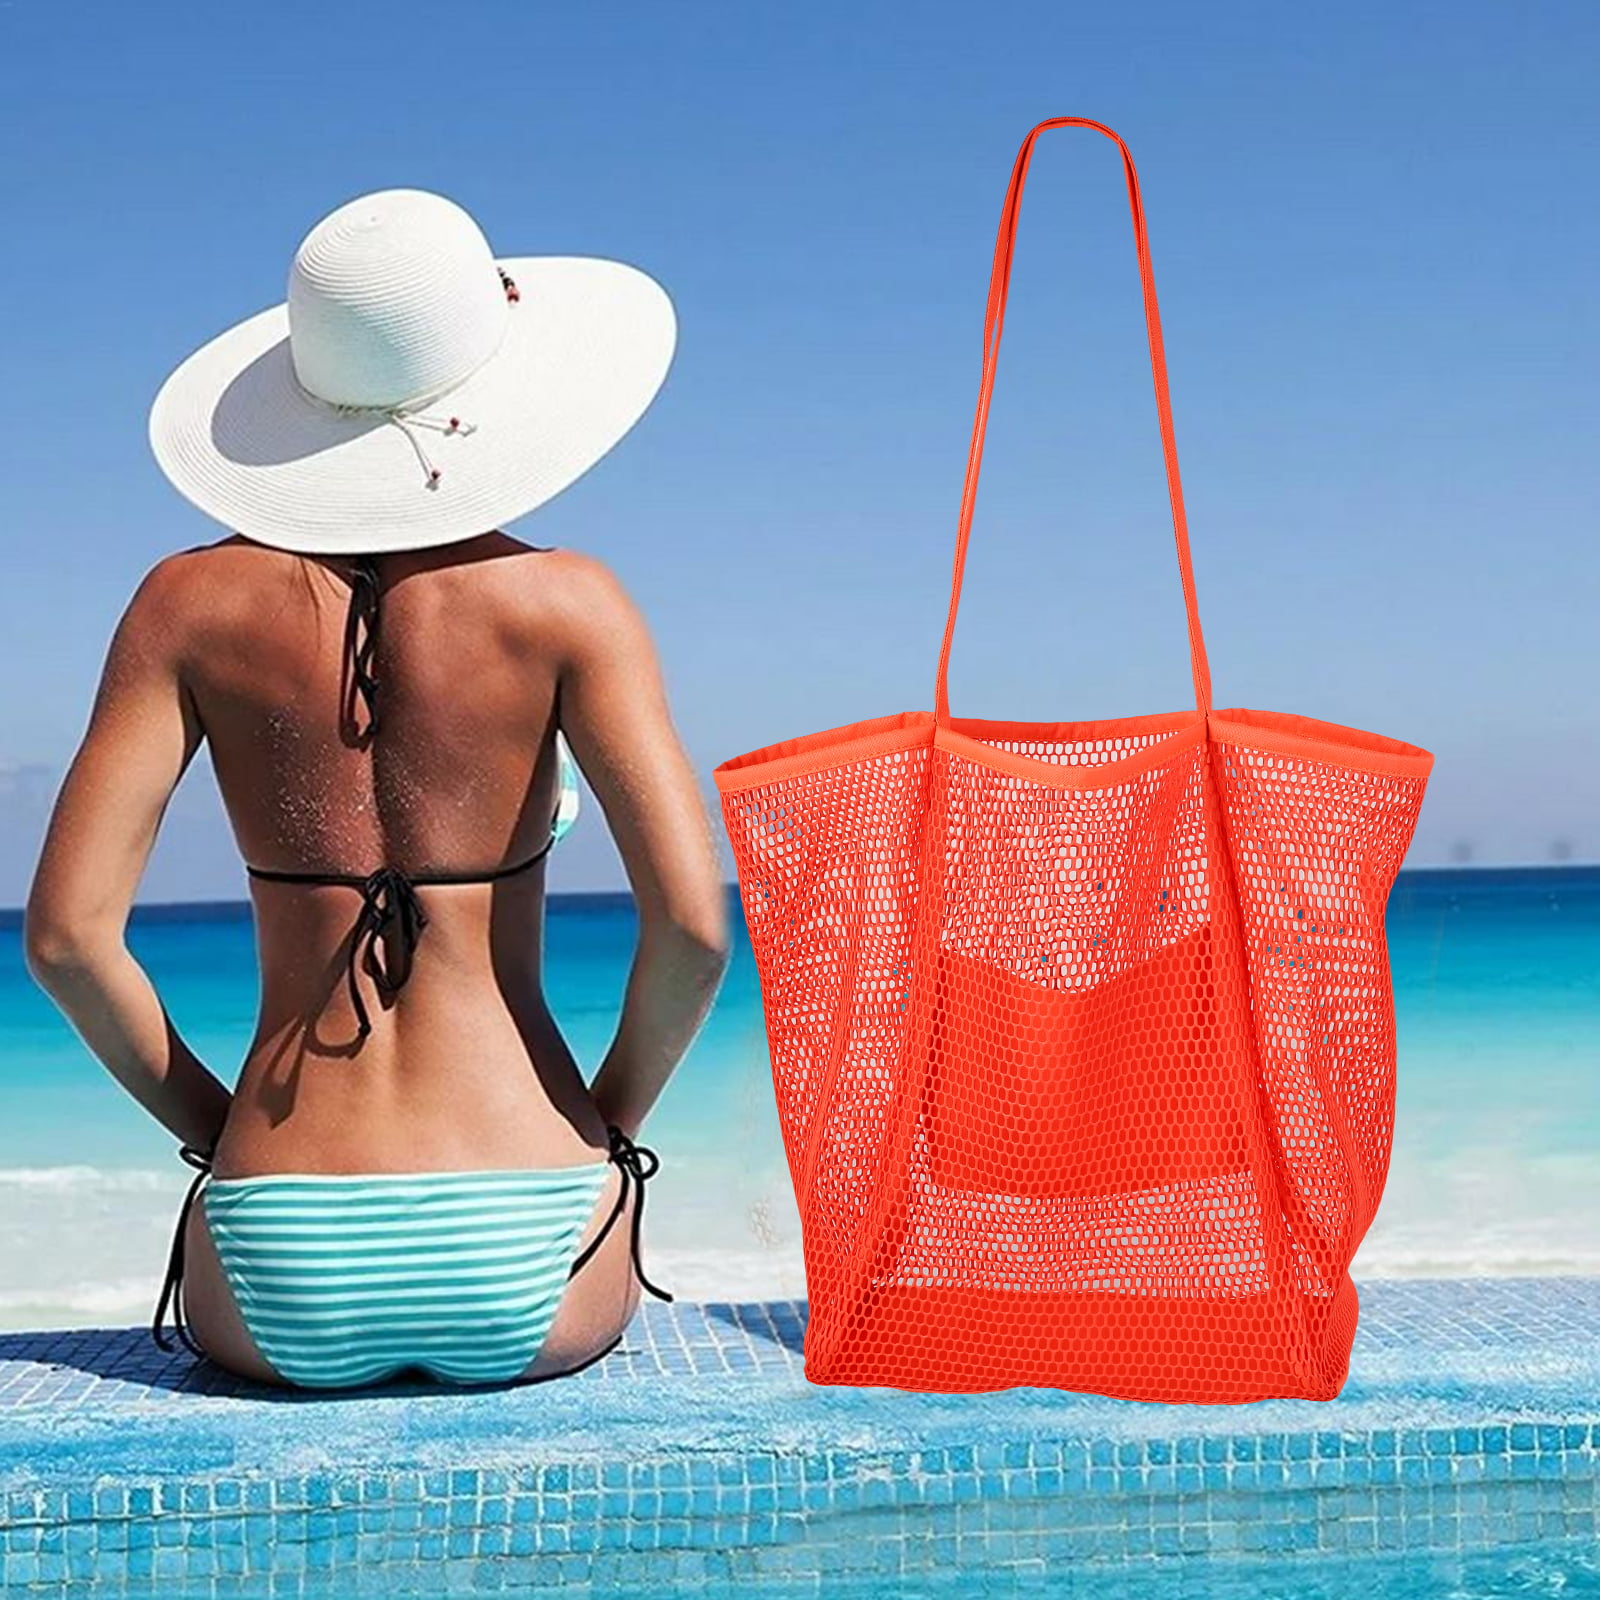 Hamish Mesh Beach Bag - Large Travel Tote Bag Lightweight & Foldable Beach Bag Toy Bag for Family Vacation